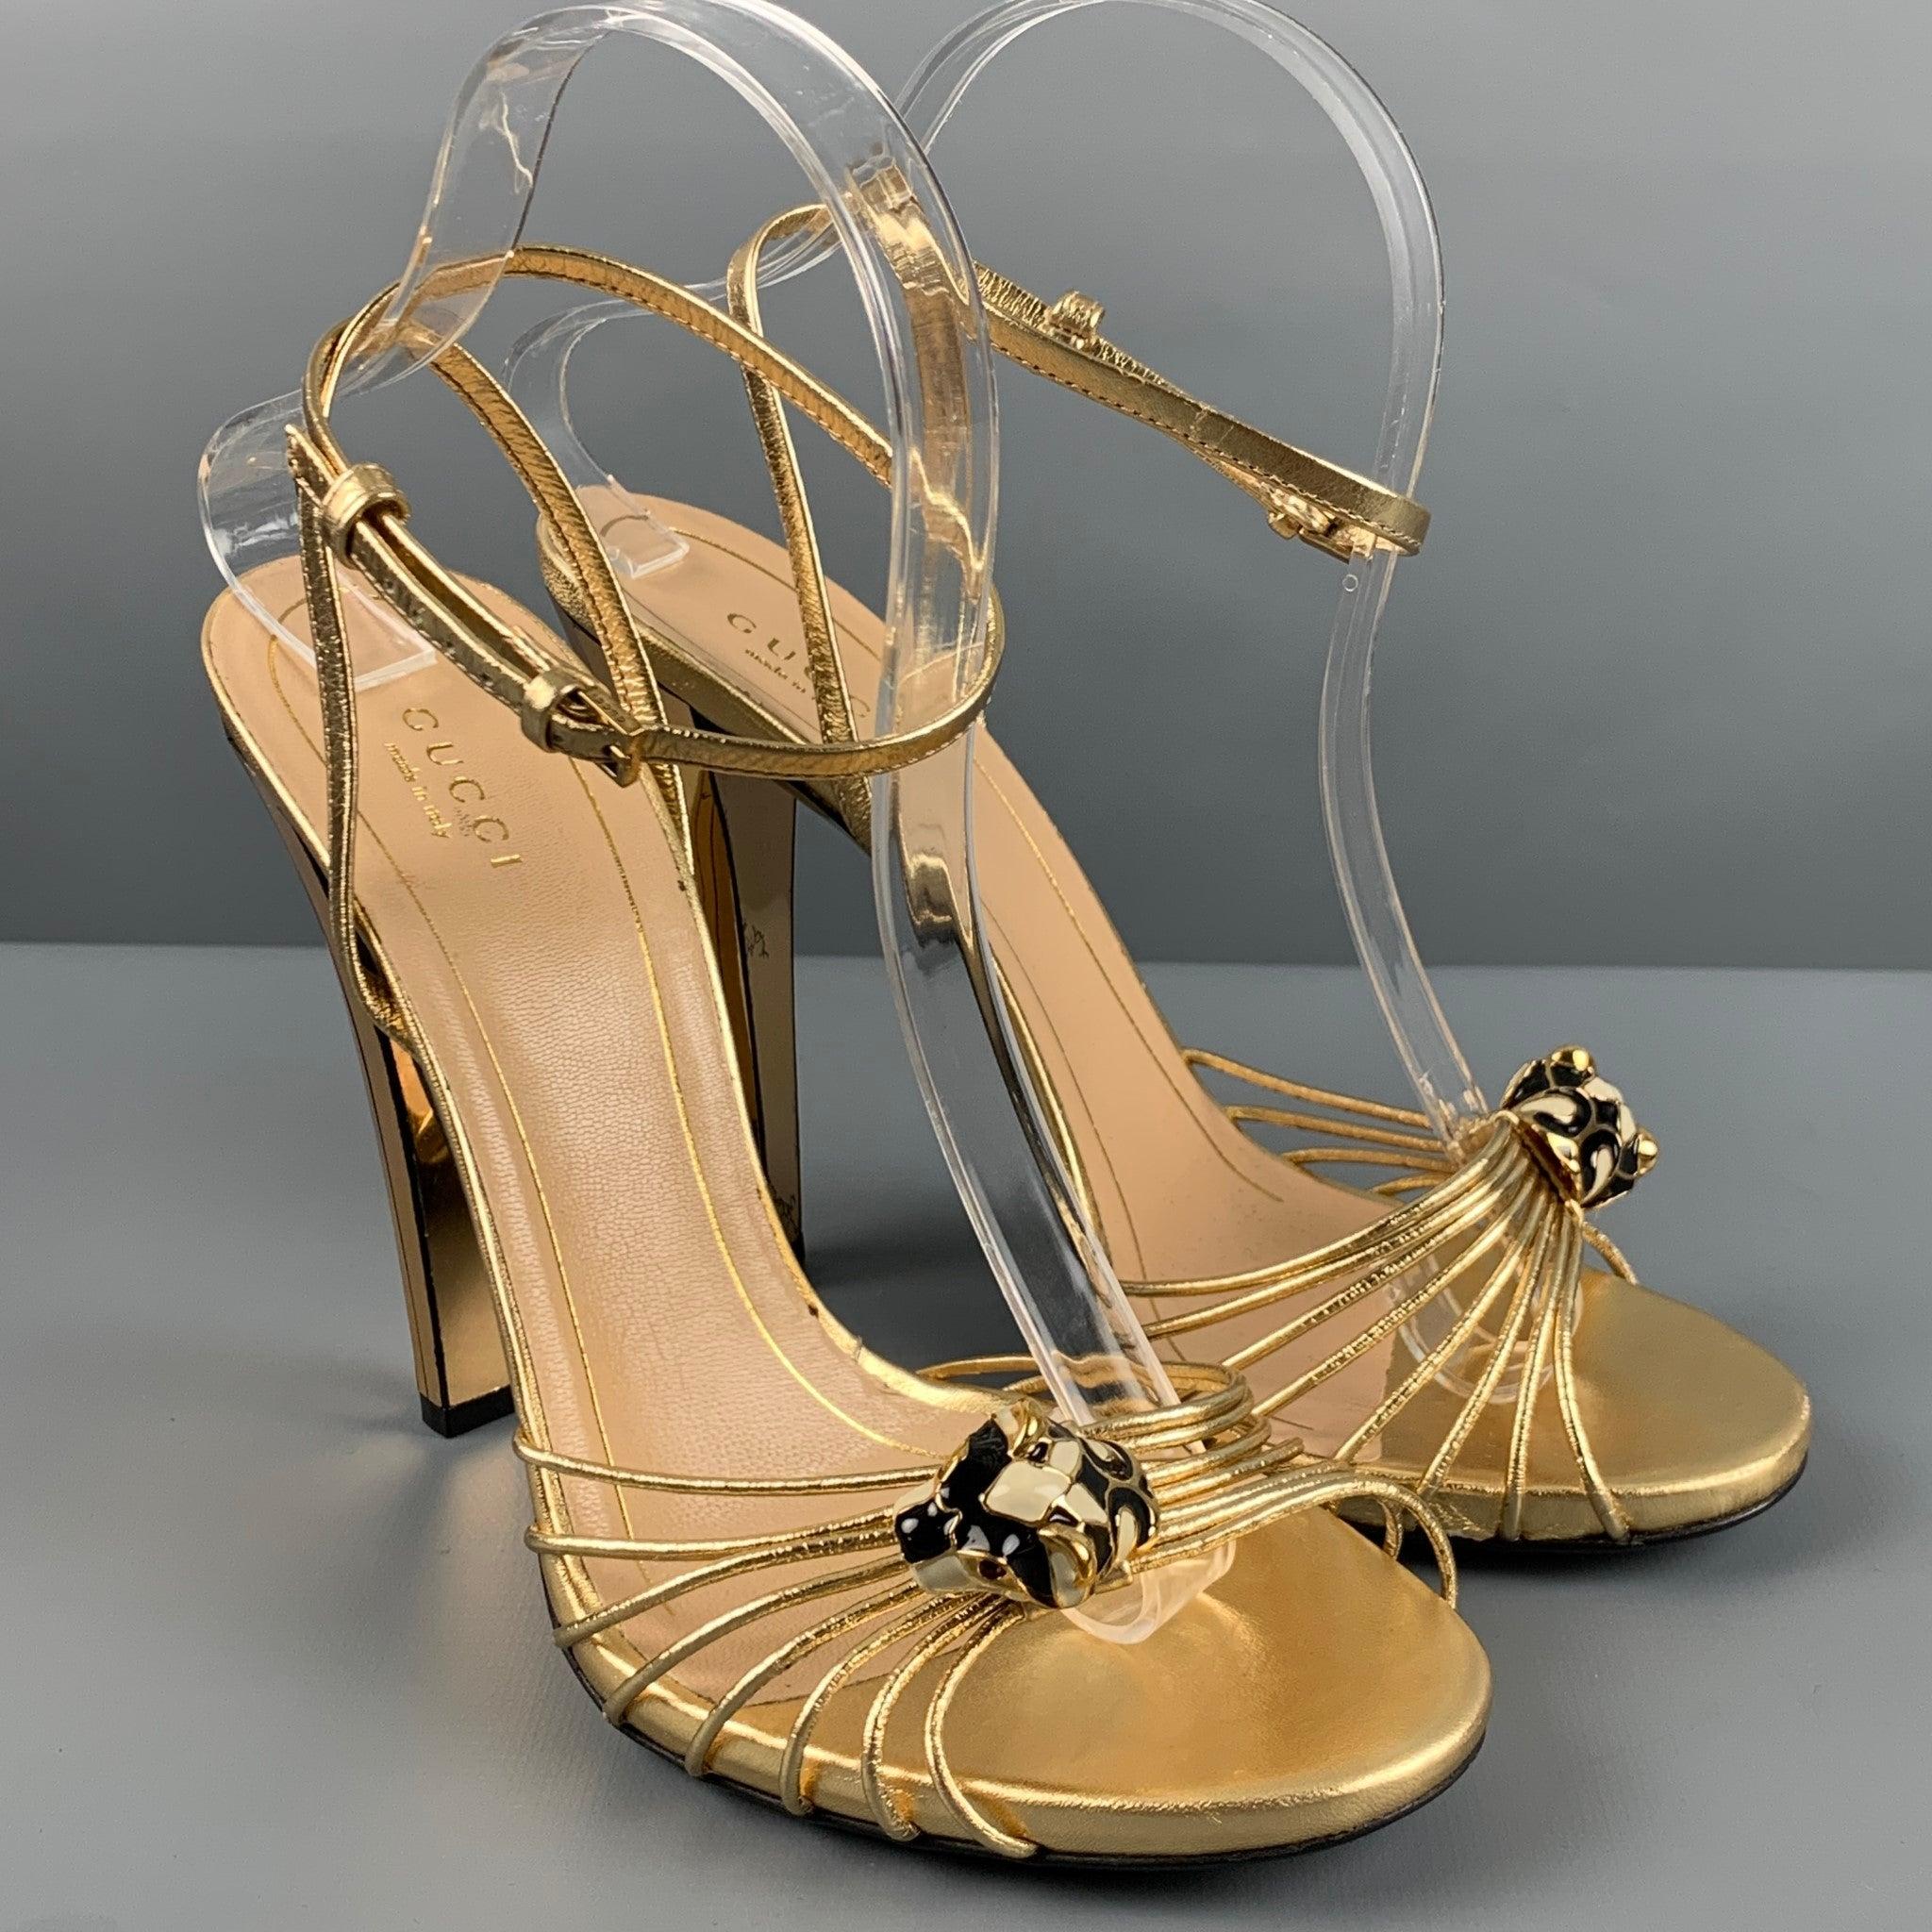 GUCCI ORO sandals comes in a gold leather featuring a open toe, ankle strap, mirrored heel, and feline gold tone metal detail. Comes with the box and dust bag. Made in Italy. Very Good Pre-Owned Condition. Moderate signs of wear. 

Marked:   39